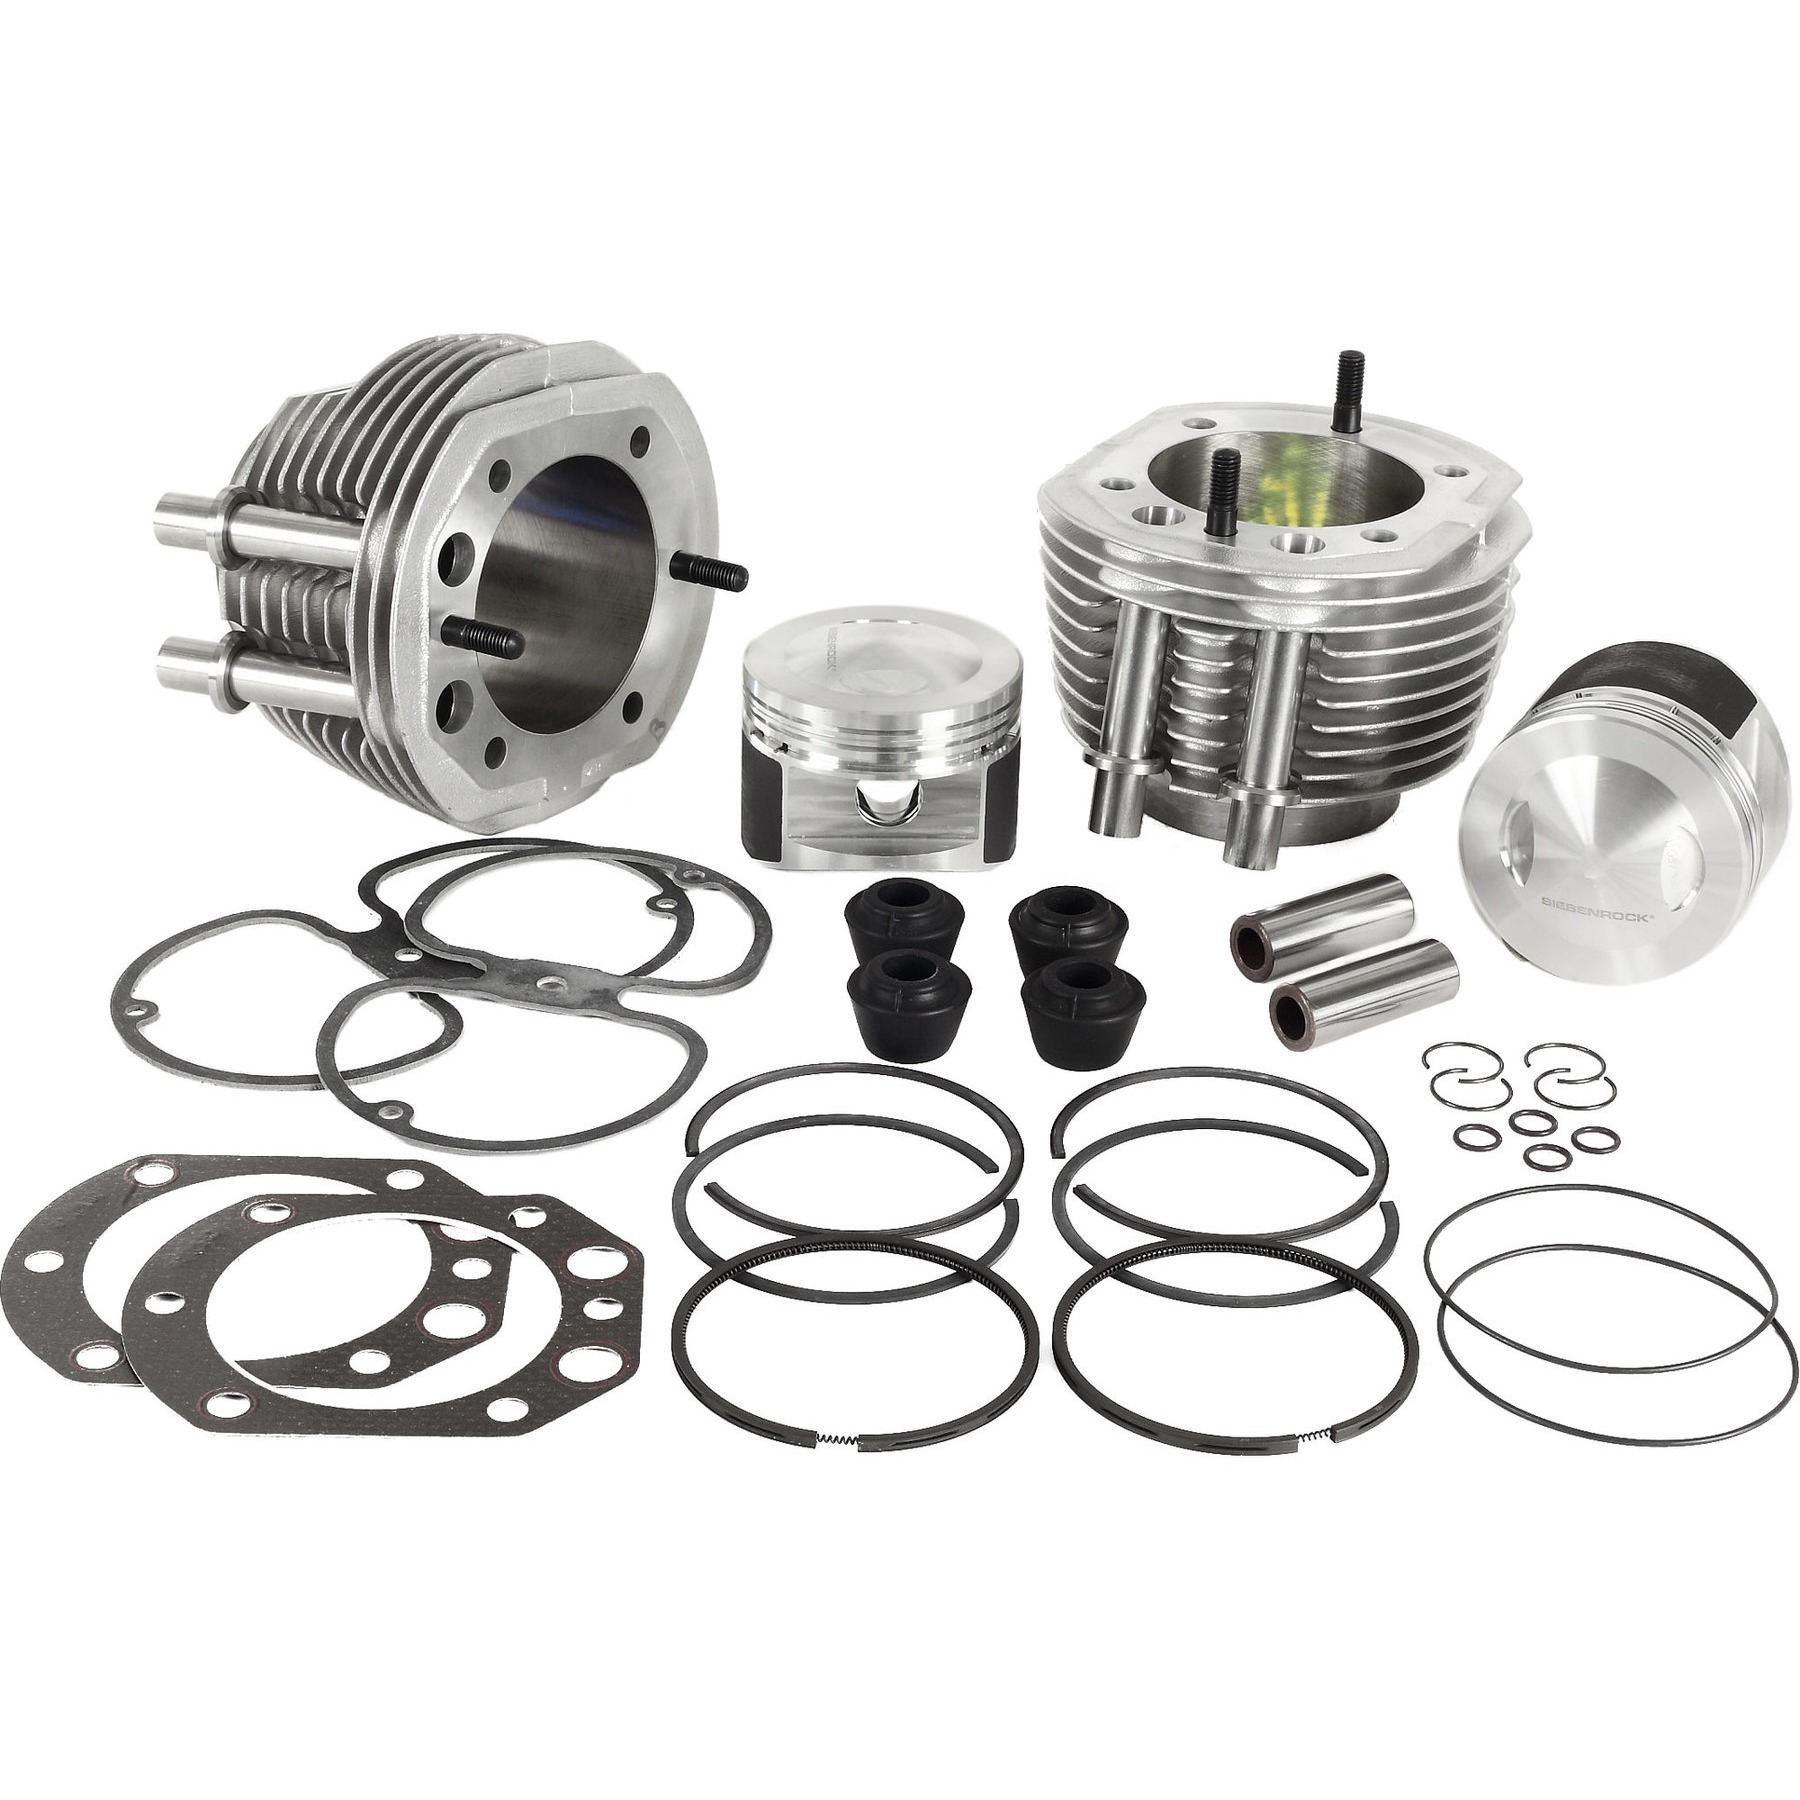 Top End Reseal Kit for all BMW R65 models